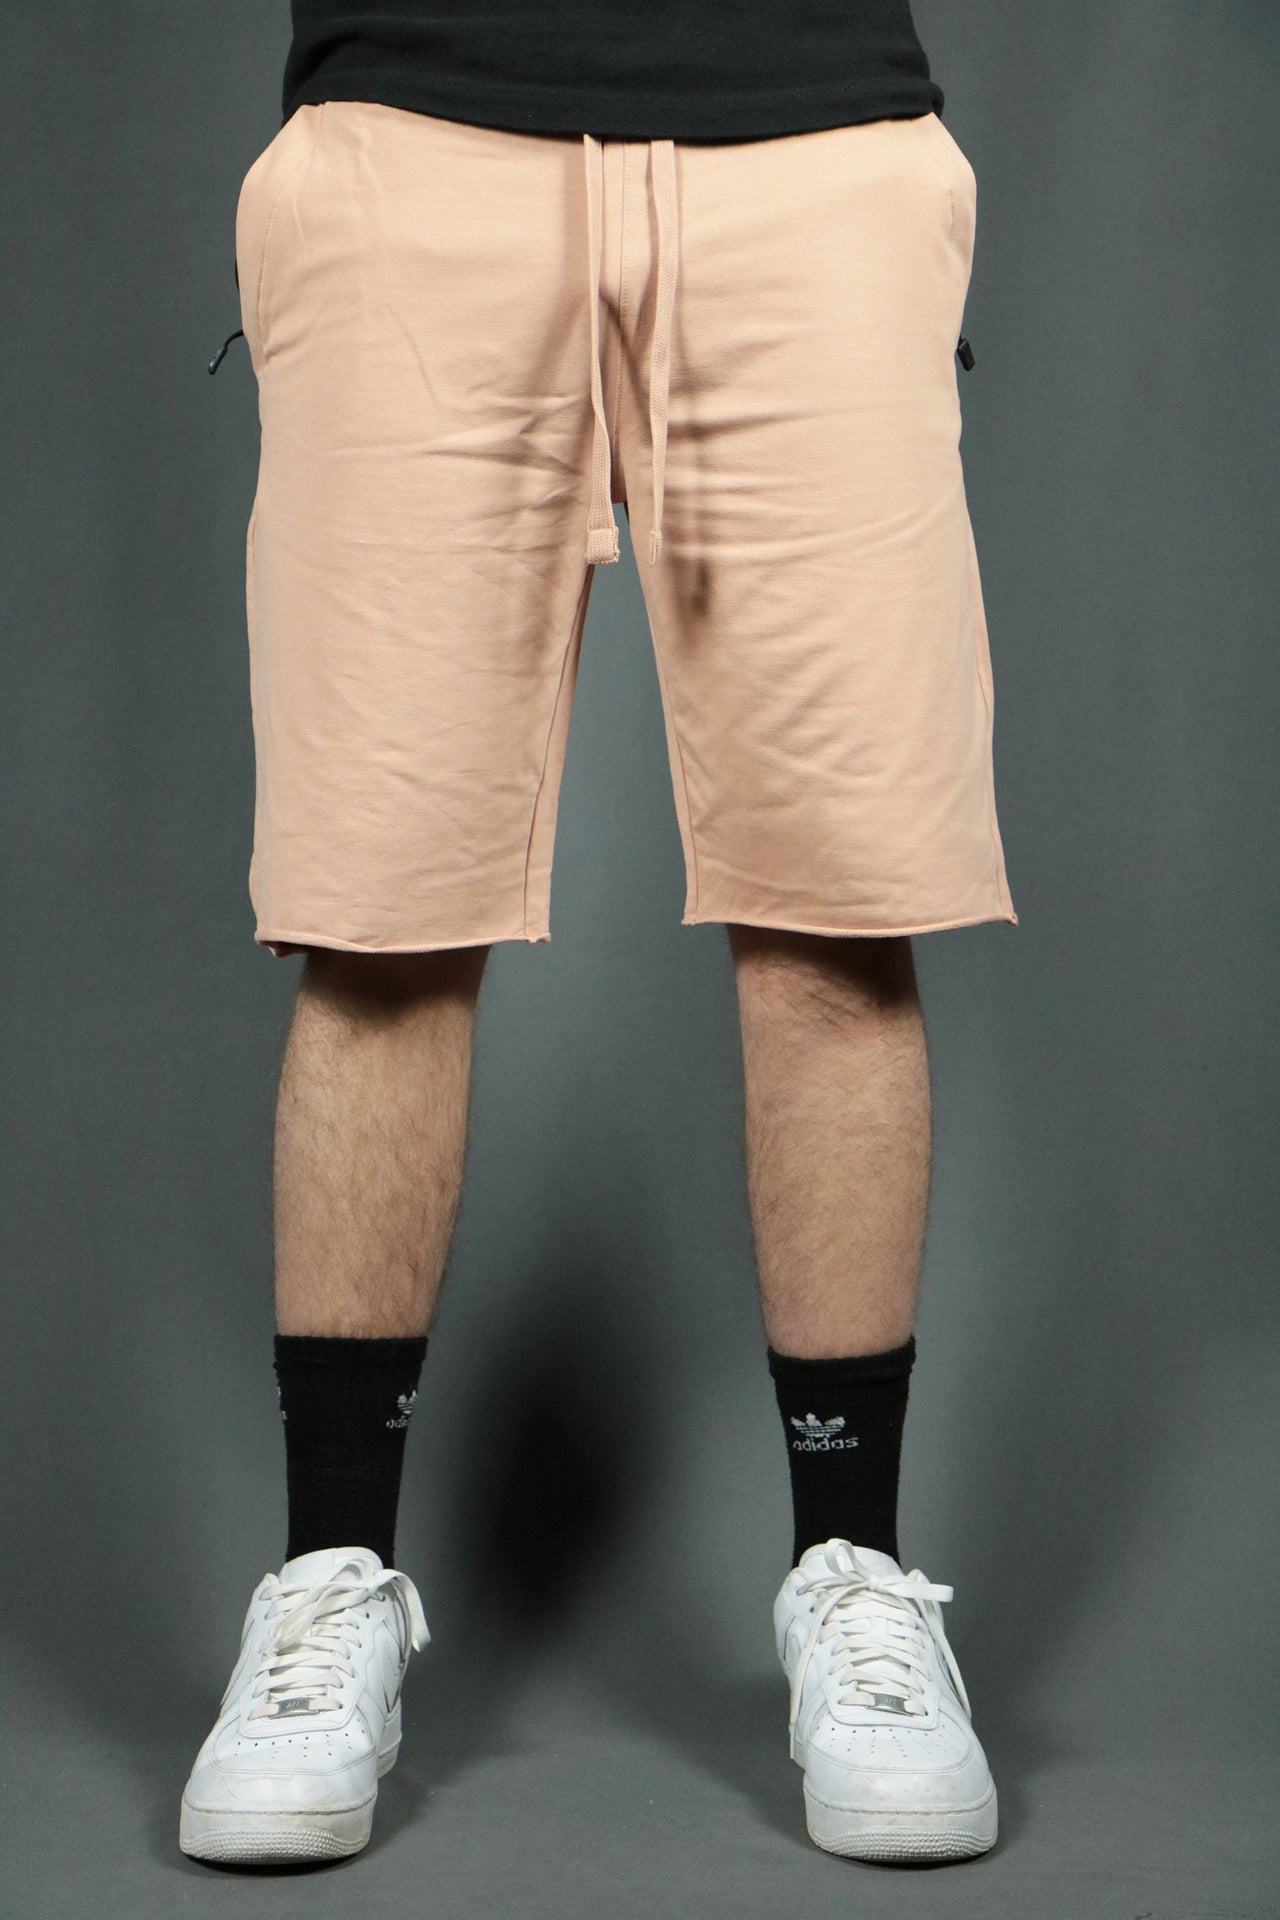 The blush men's toweling shorts made from terry cloth by Jordan Craig.